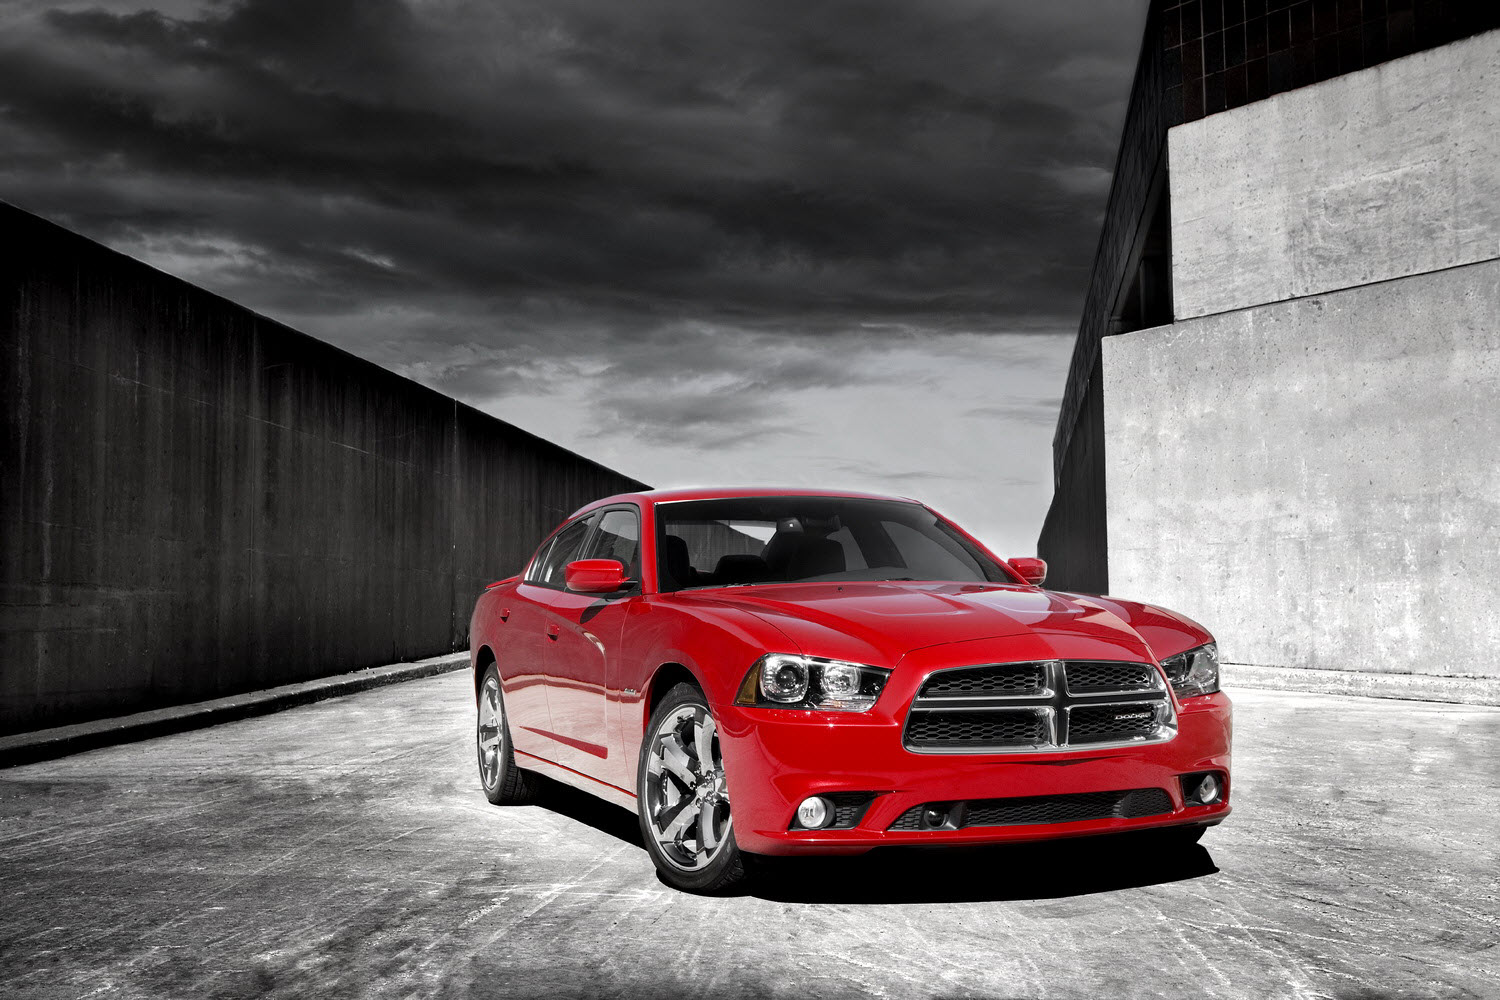 New 2011 Dodge Charger Unveiled